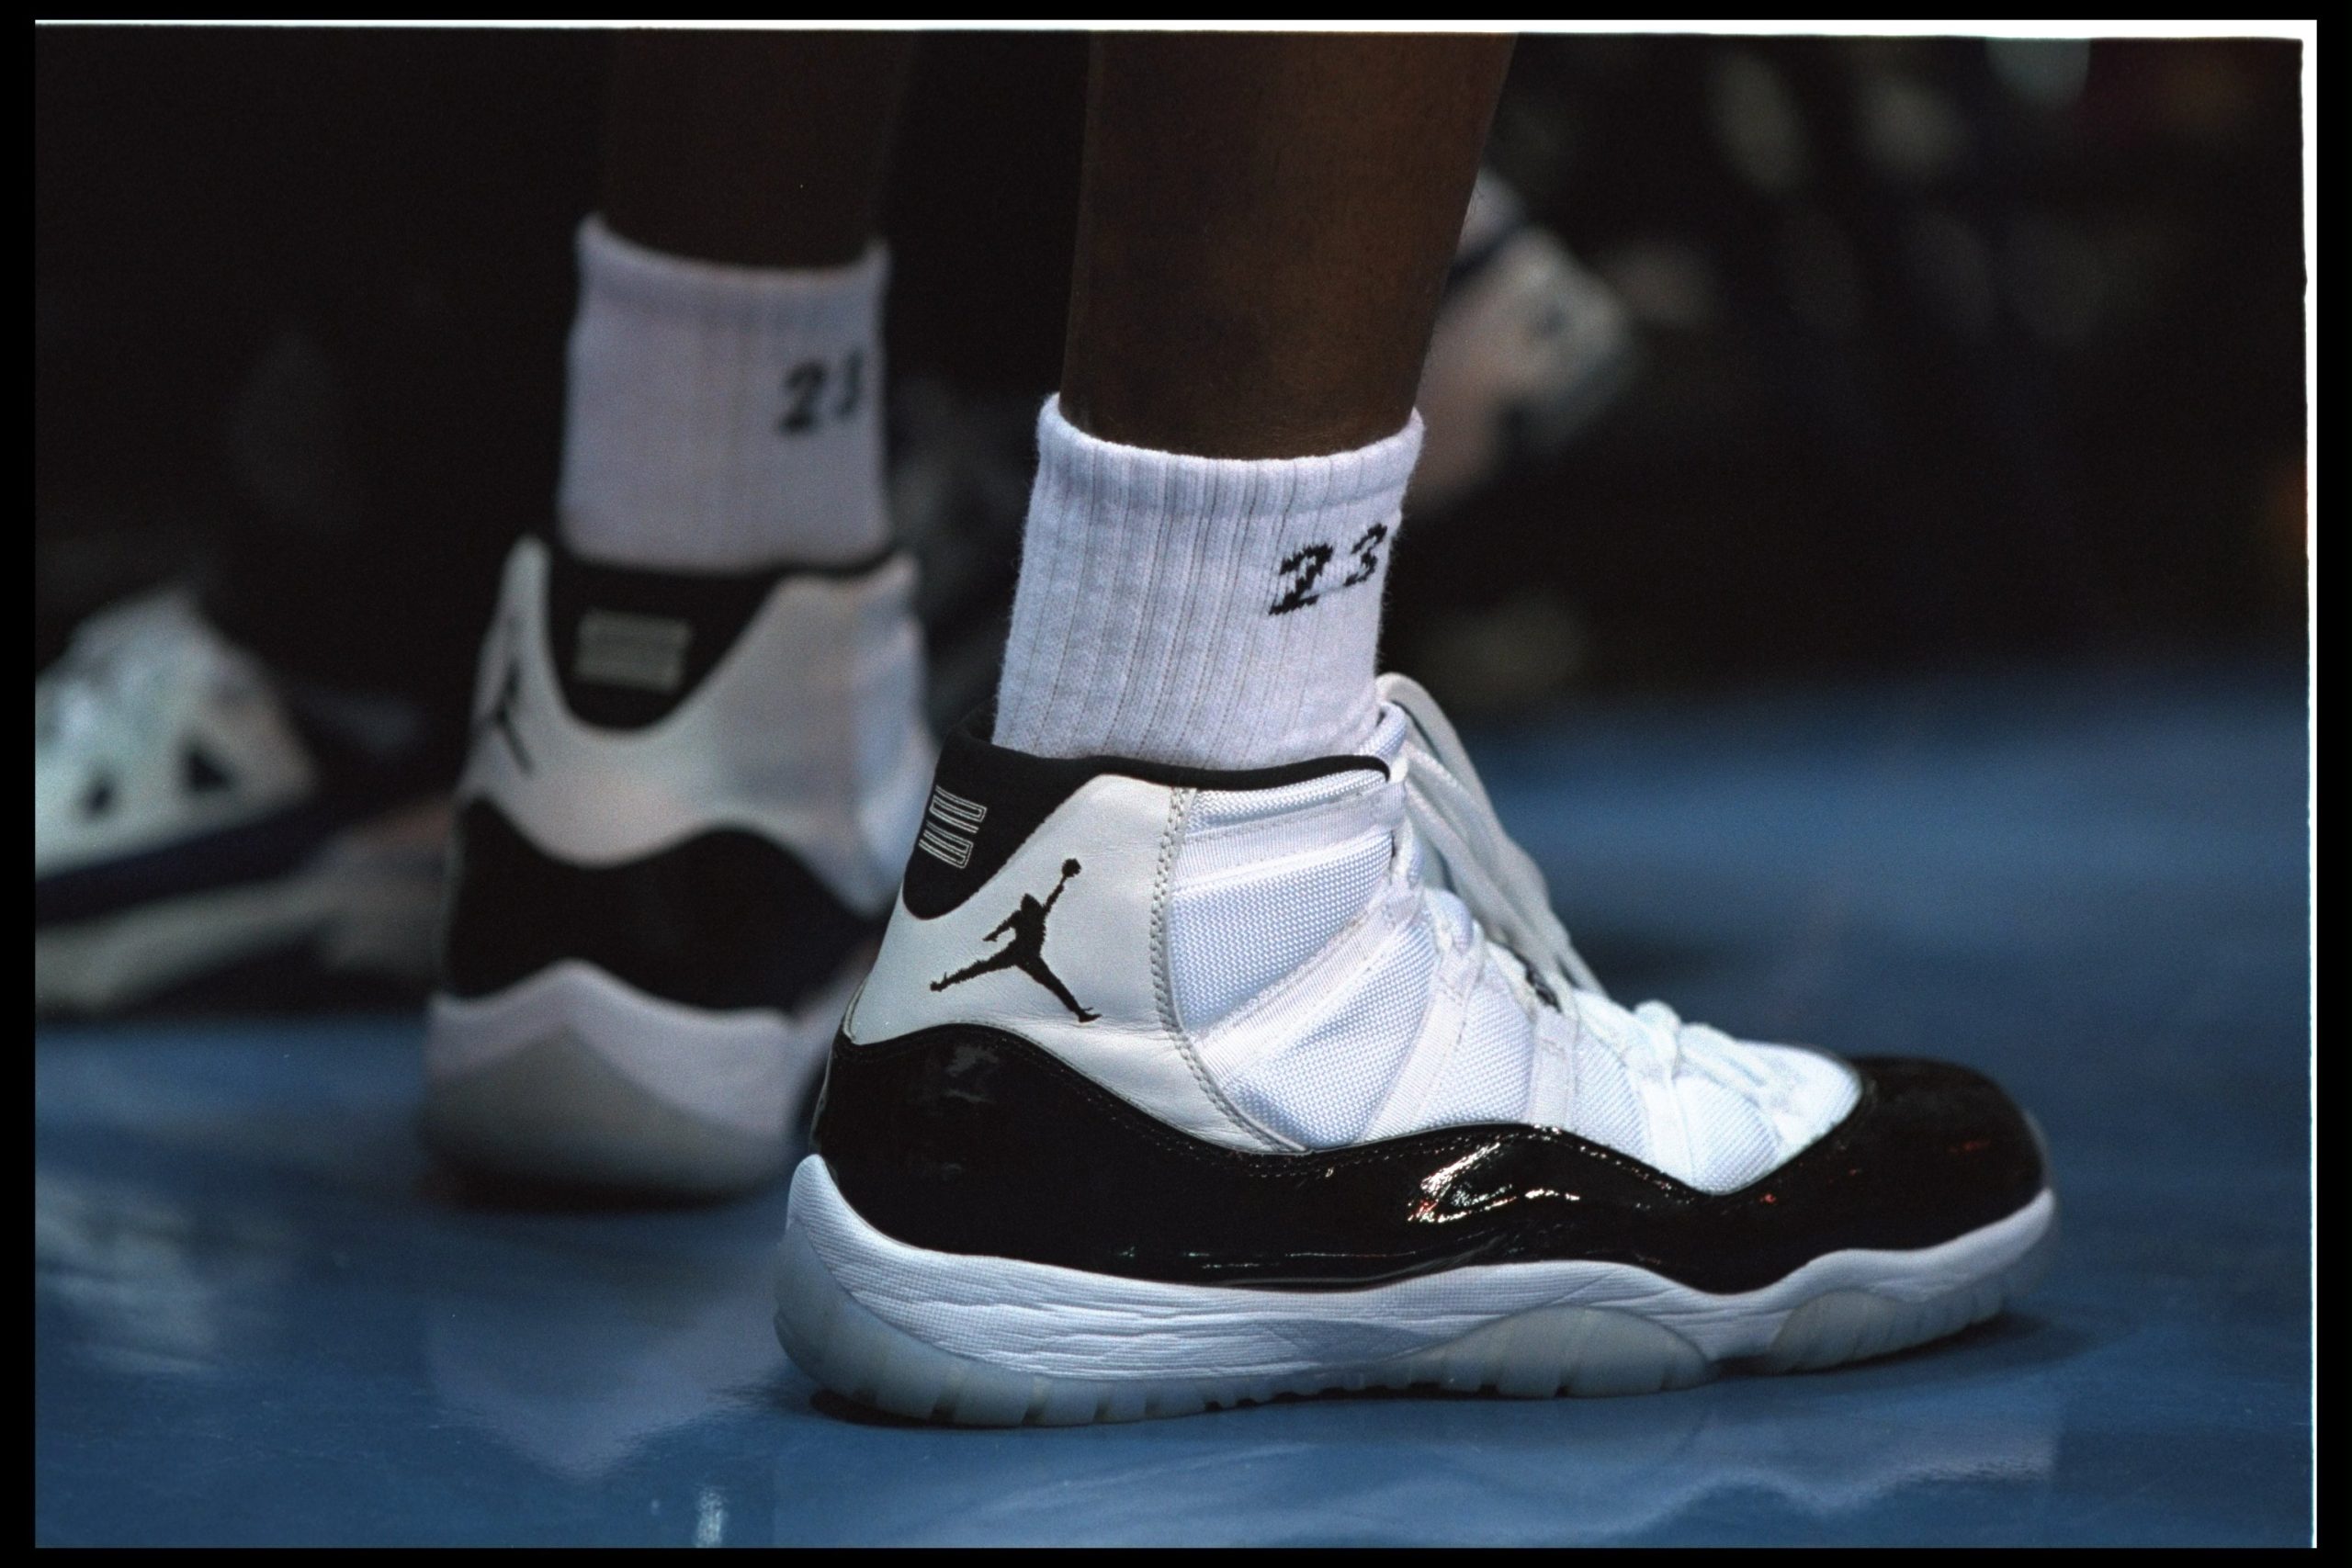 The 25 Best Sneakers to Appear on SLAM Covers